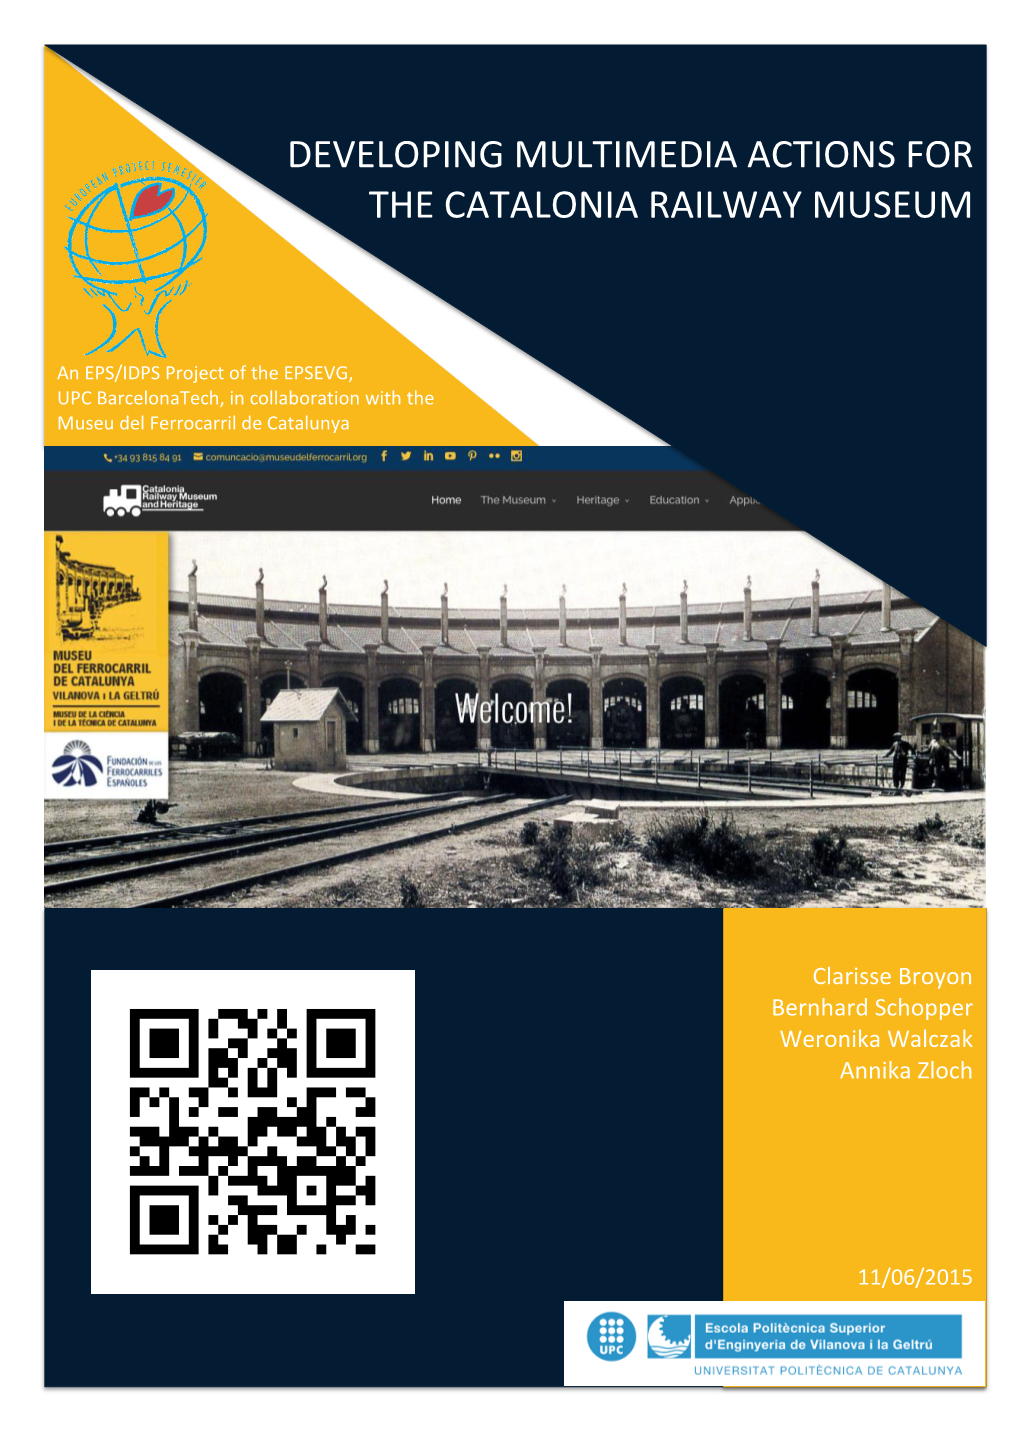 Developing Multimedia Actions for the Catalonia Railway Museum